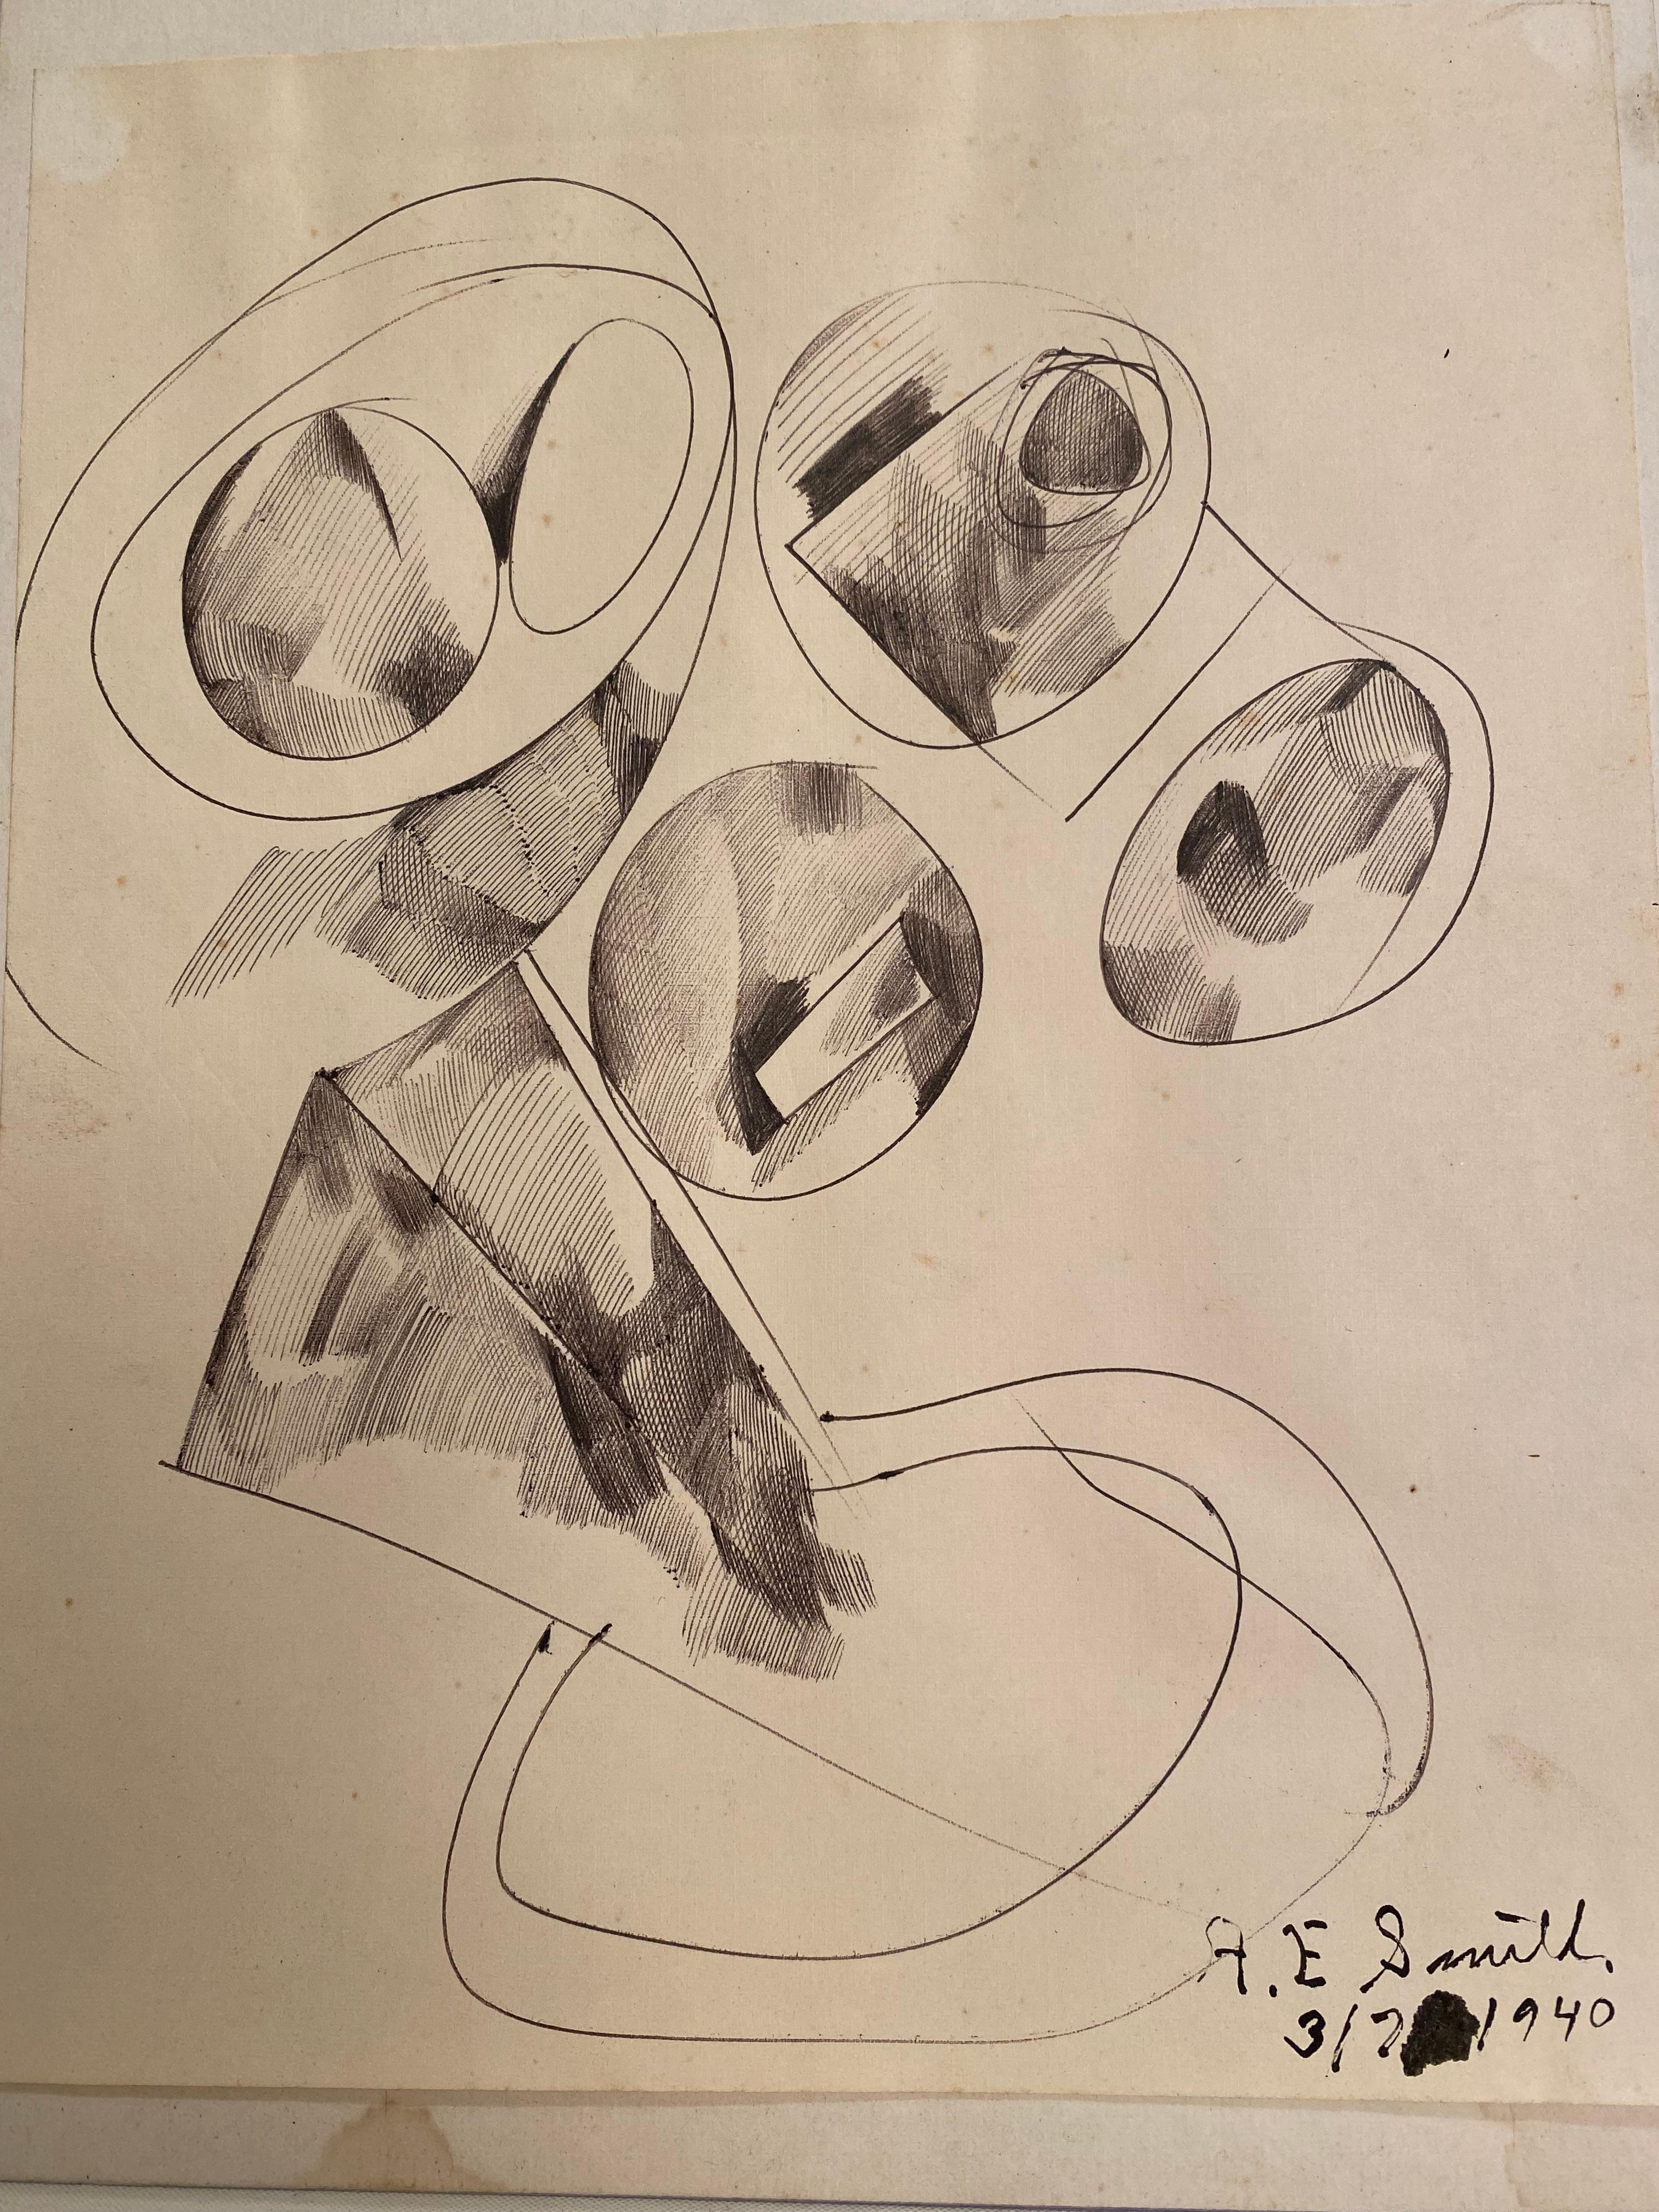 1940s A.E. Smith Pen and Ink Abstract Drawing For Sale 2